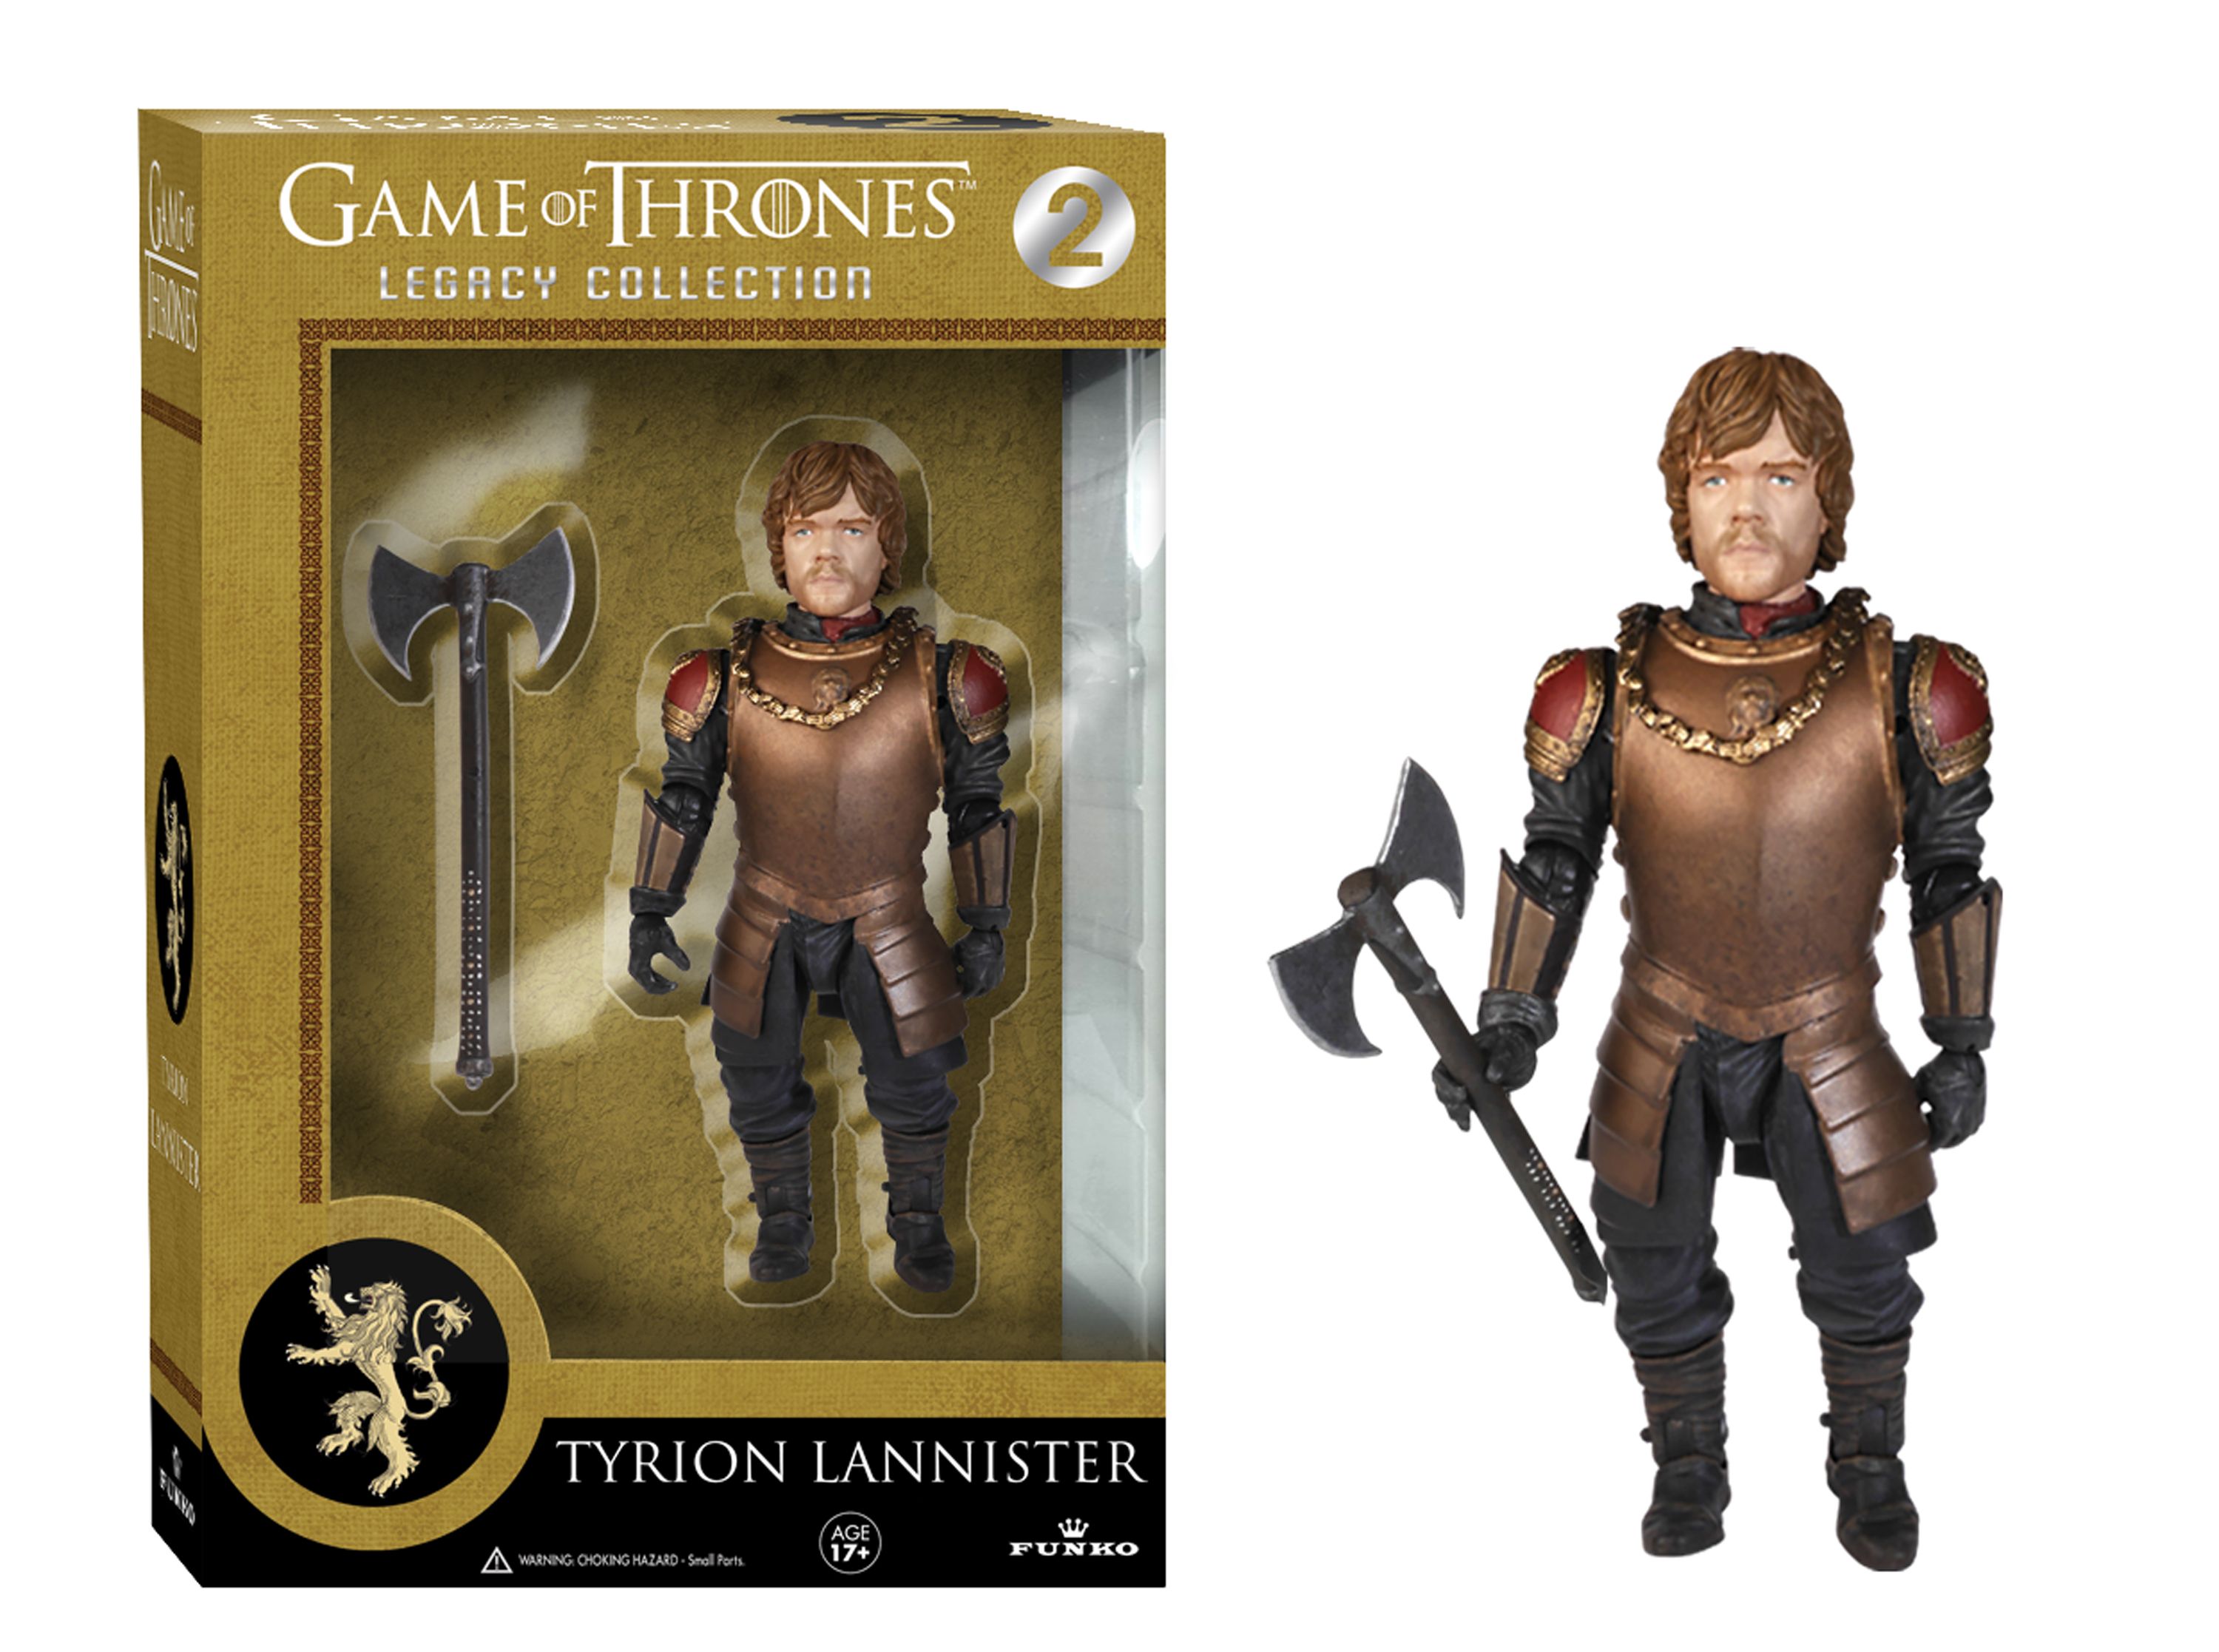 Tyrion Lannister action figure